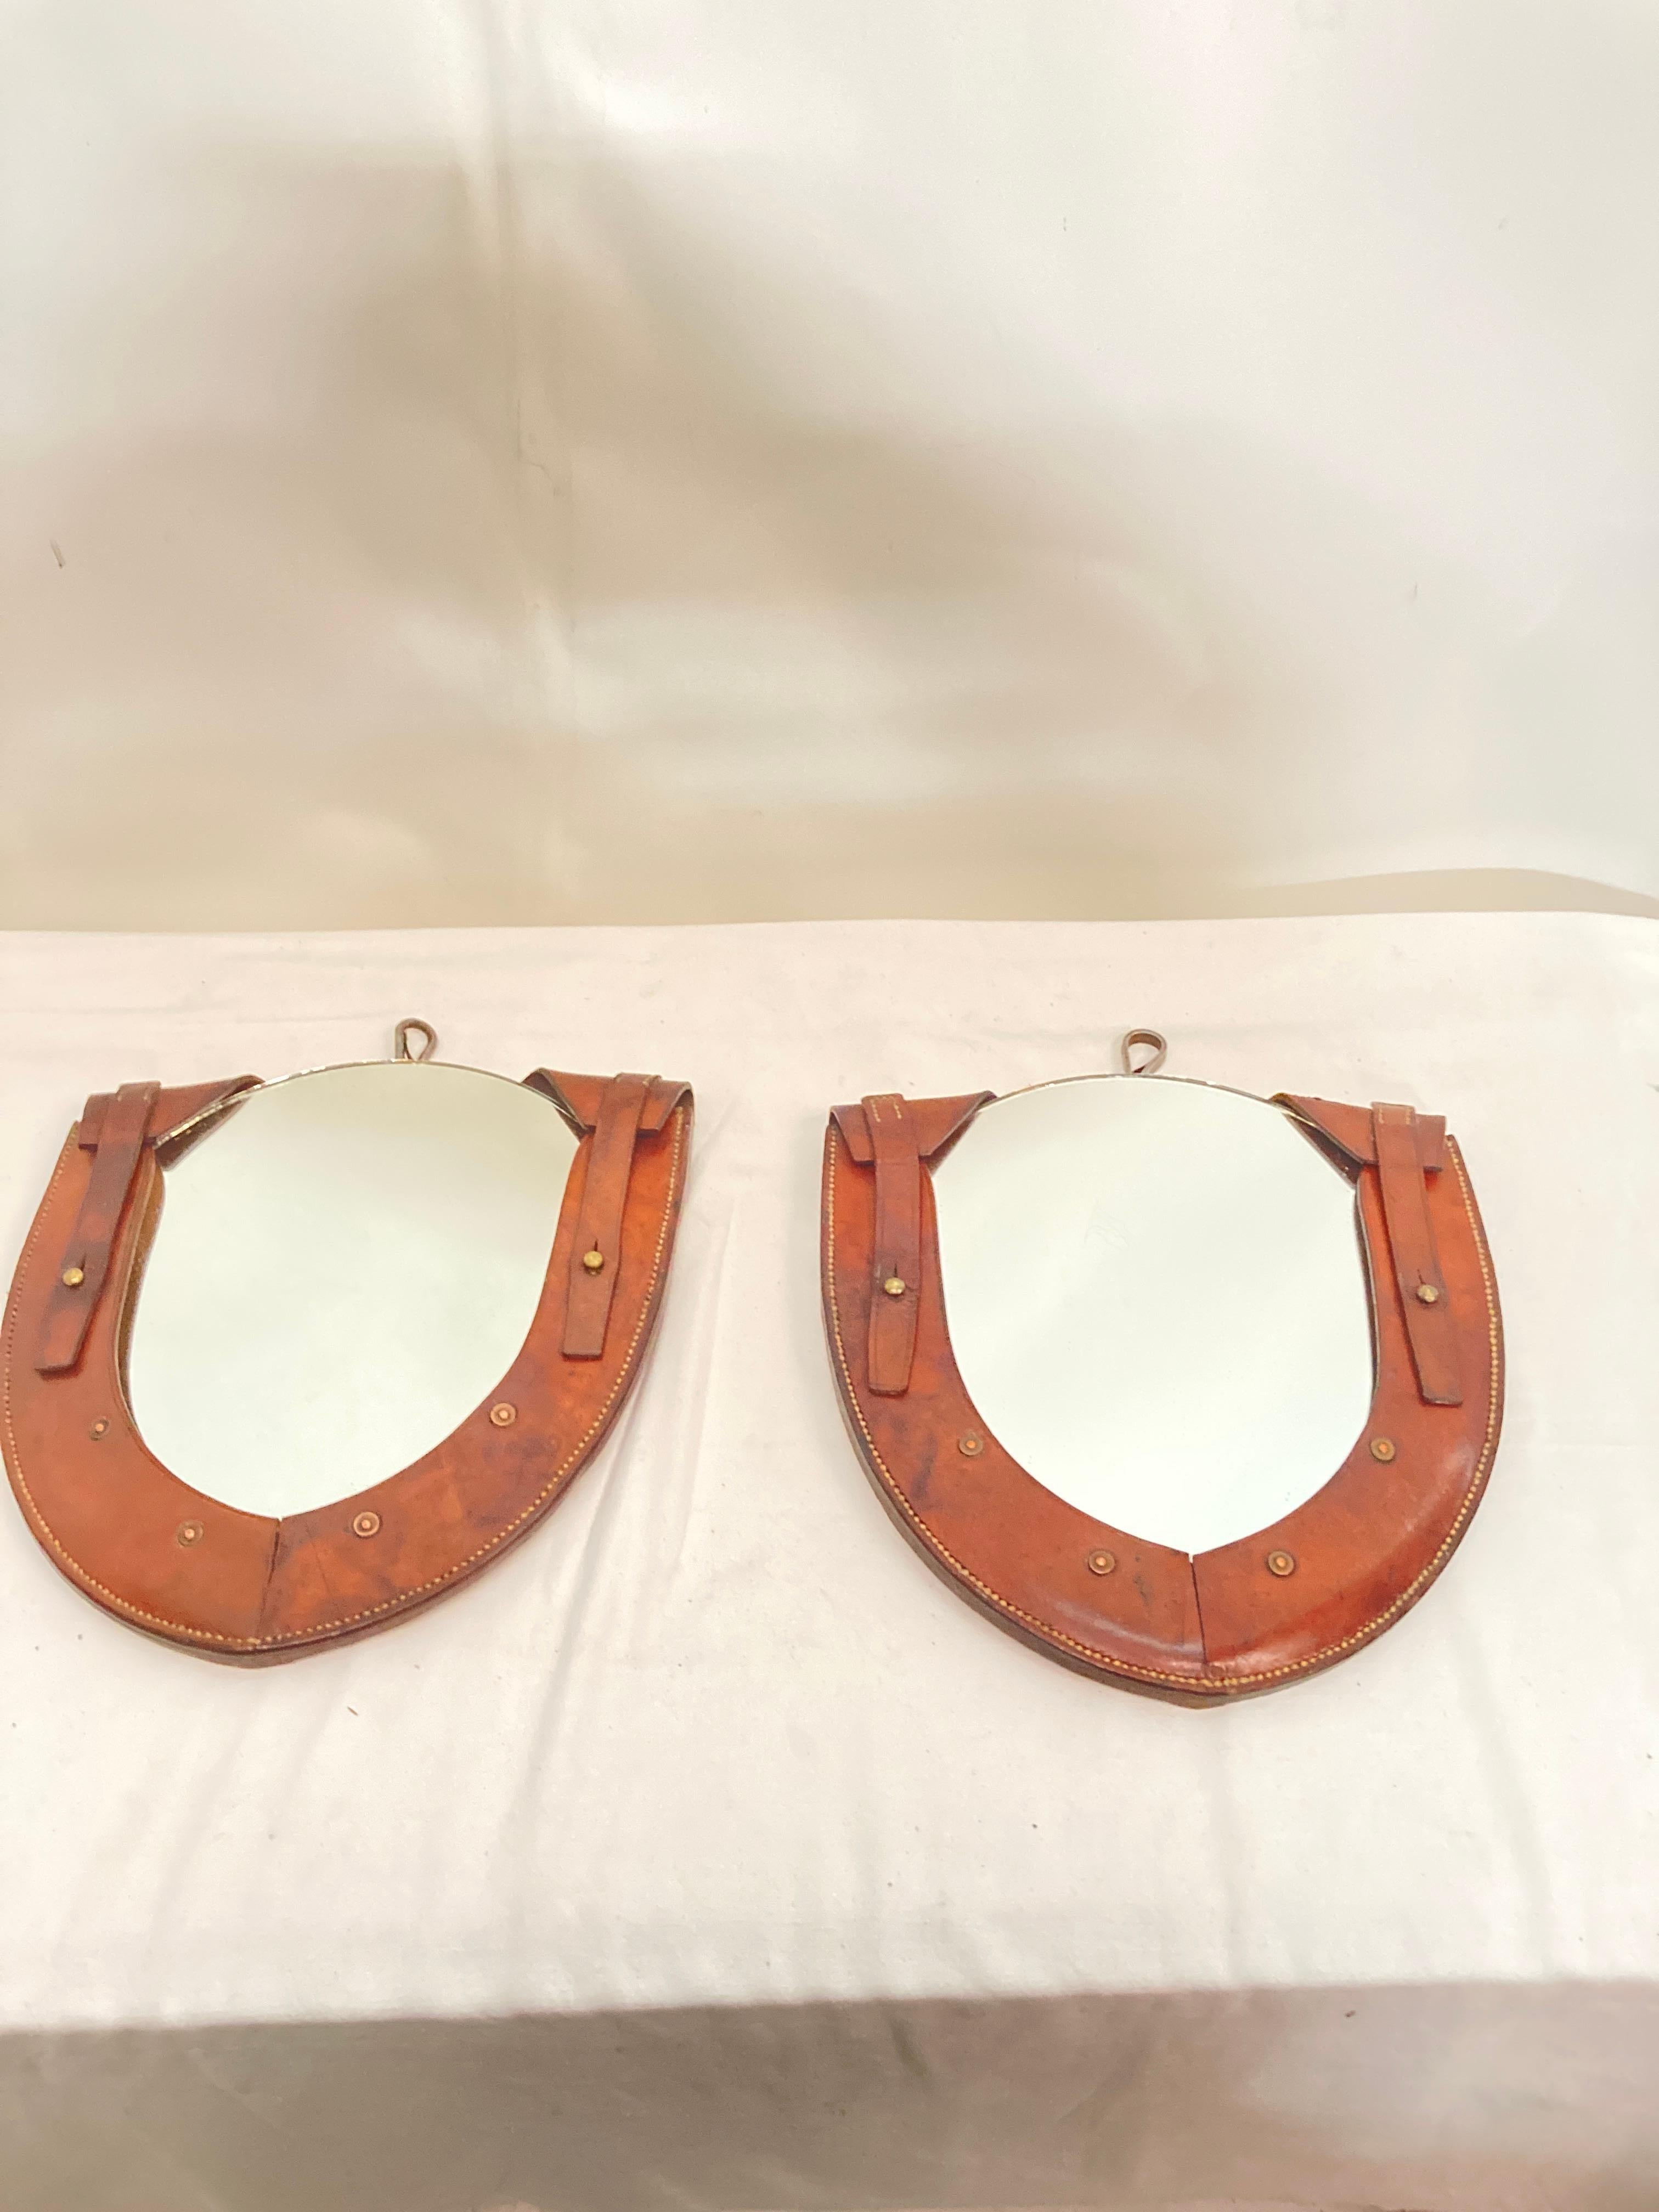 Pair of small stitched leather wall mirror
1950's
France